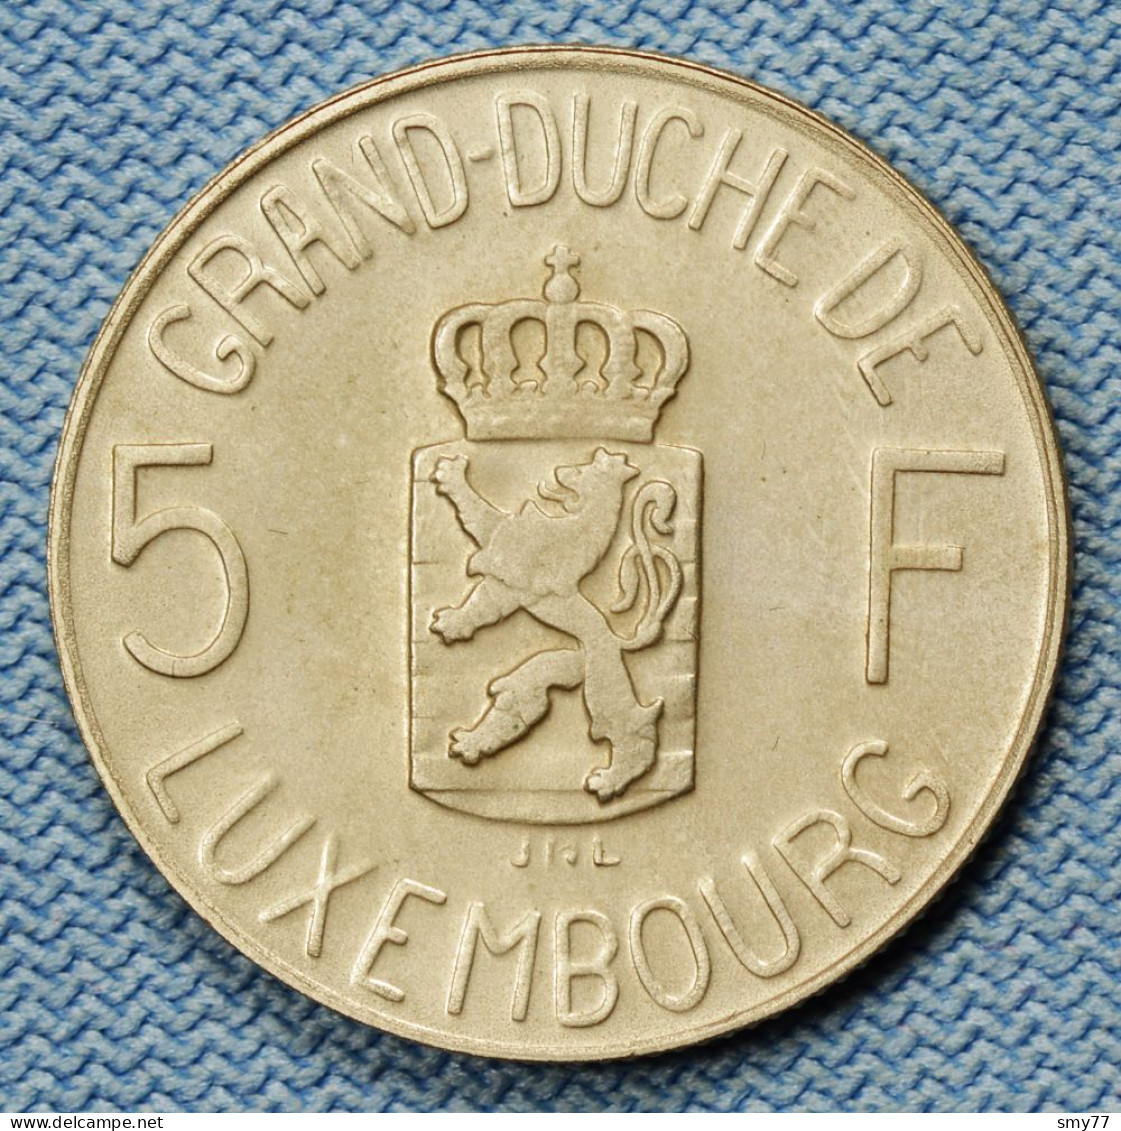 Luxembourg • 5 Francs 1980  Argent / Silver 925‰ (Charlotte) •  QP / Flan Poli  •  3'000 Ex.  • Rare •  [24-462] - Luxemburg